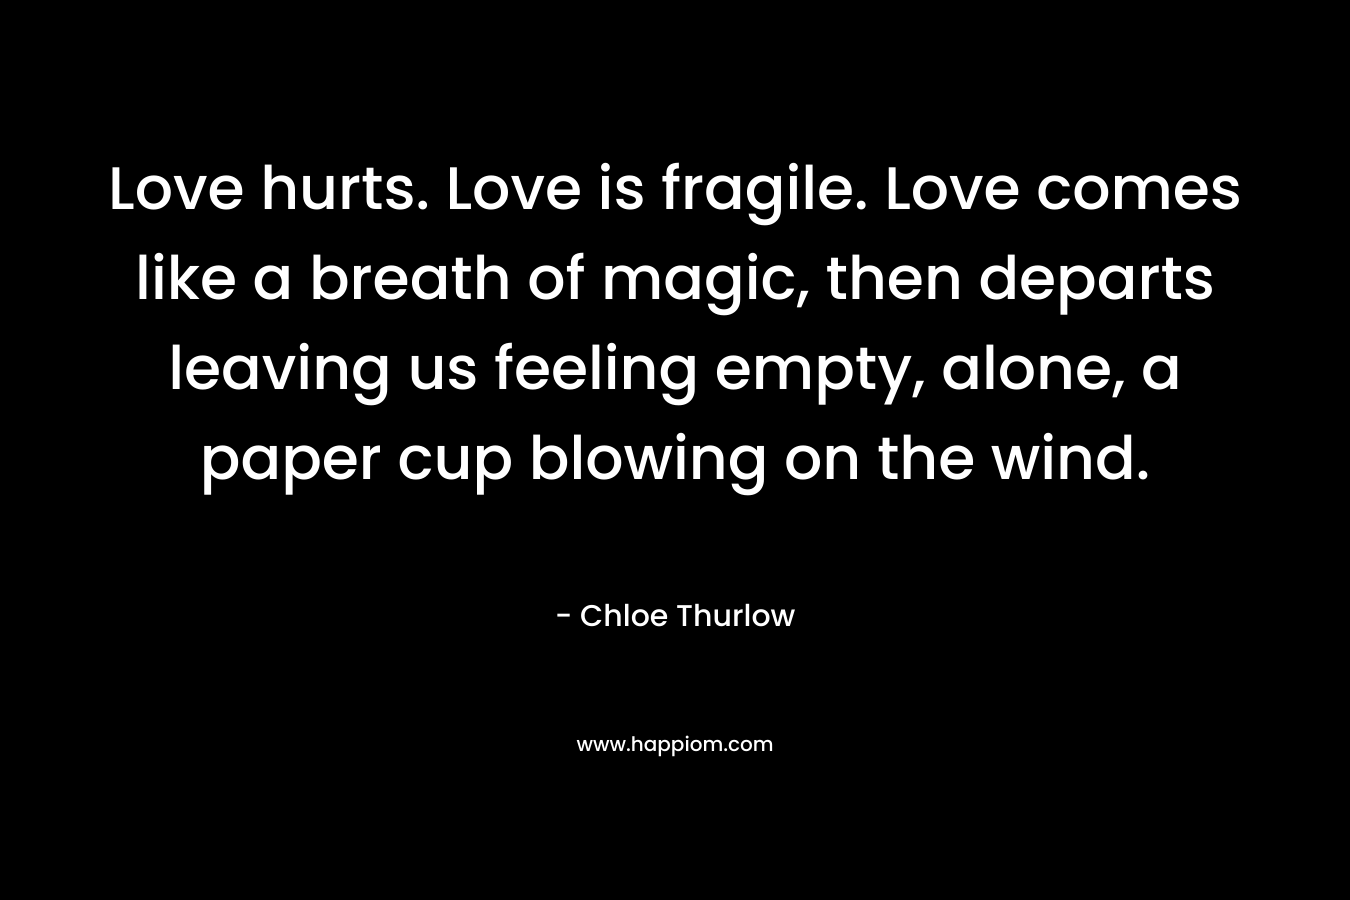 Love hurts. Love is fragile. Love comes like a breath of magic, then departs leaving us feeling empty, alone, a paper cup blowing on the wind. – Chloe Thurlow